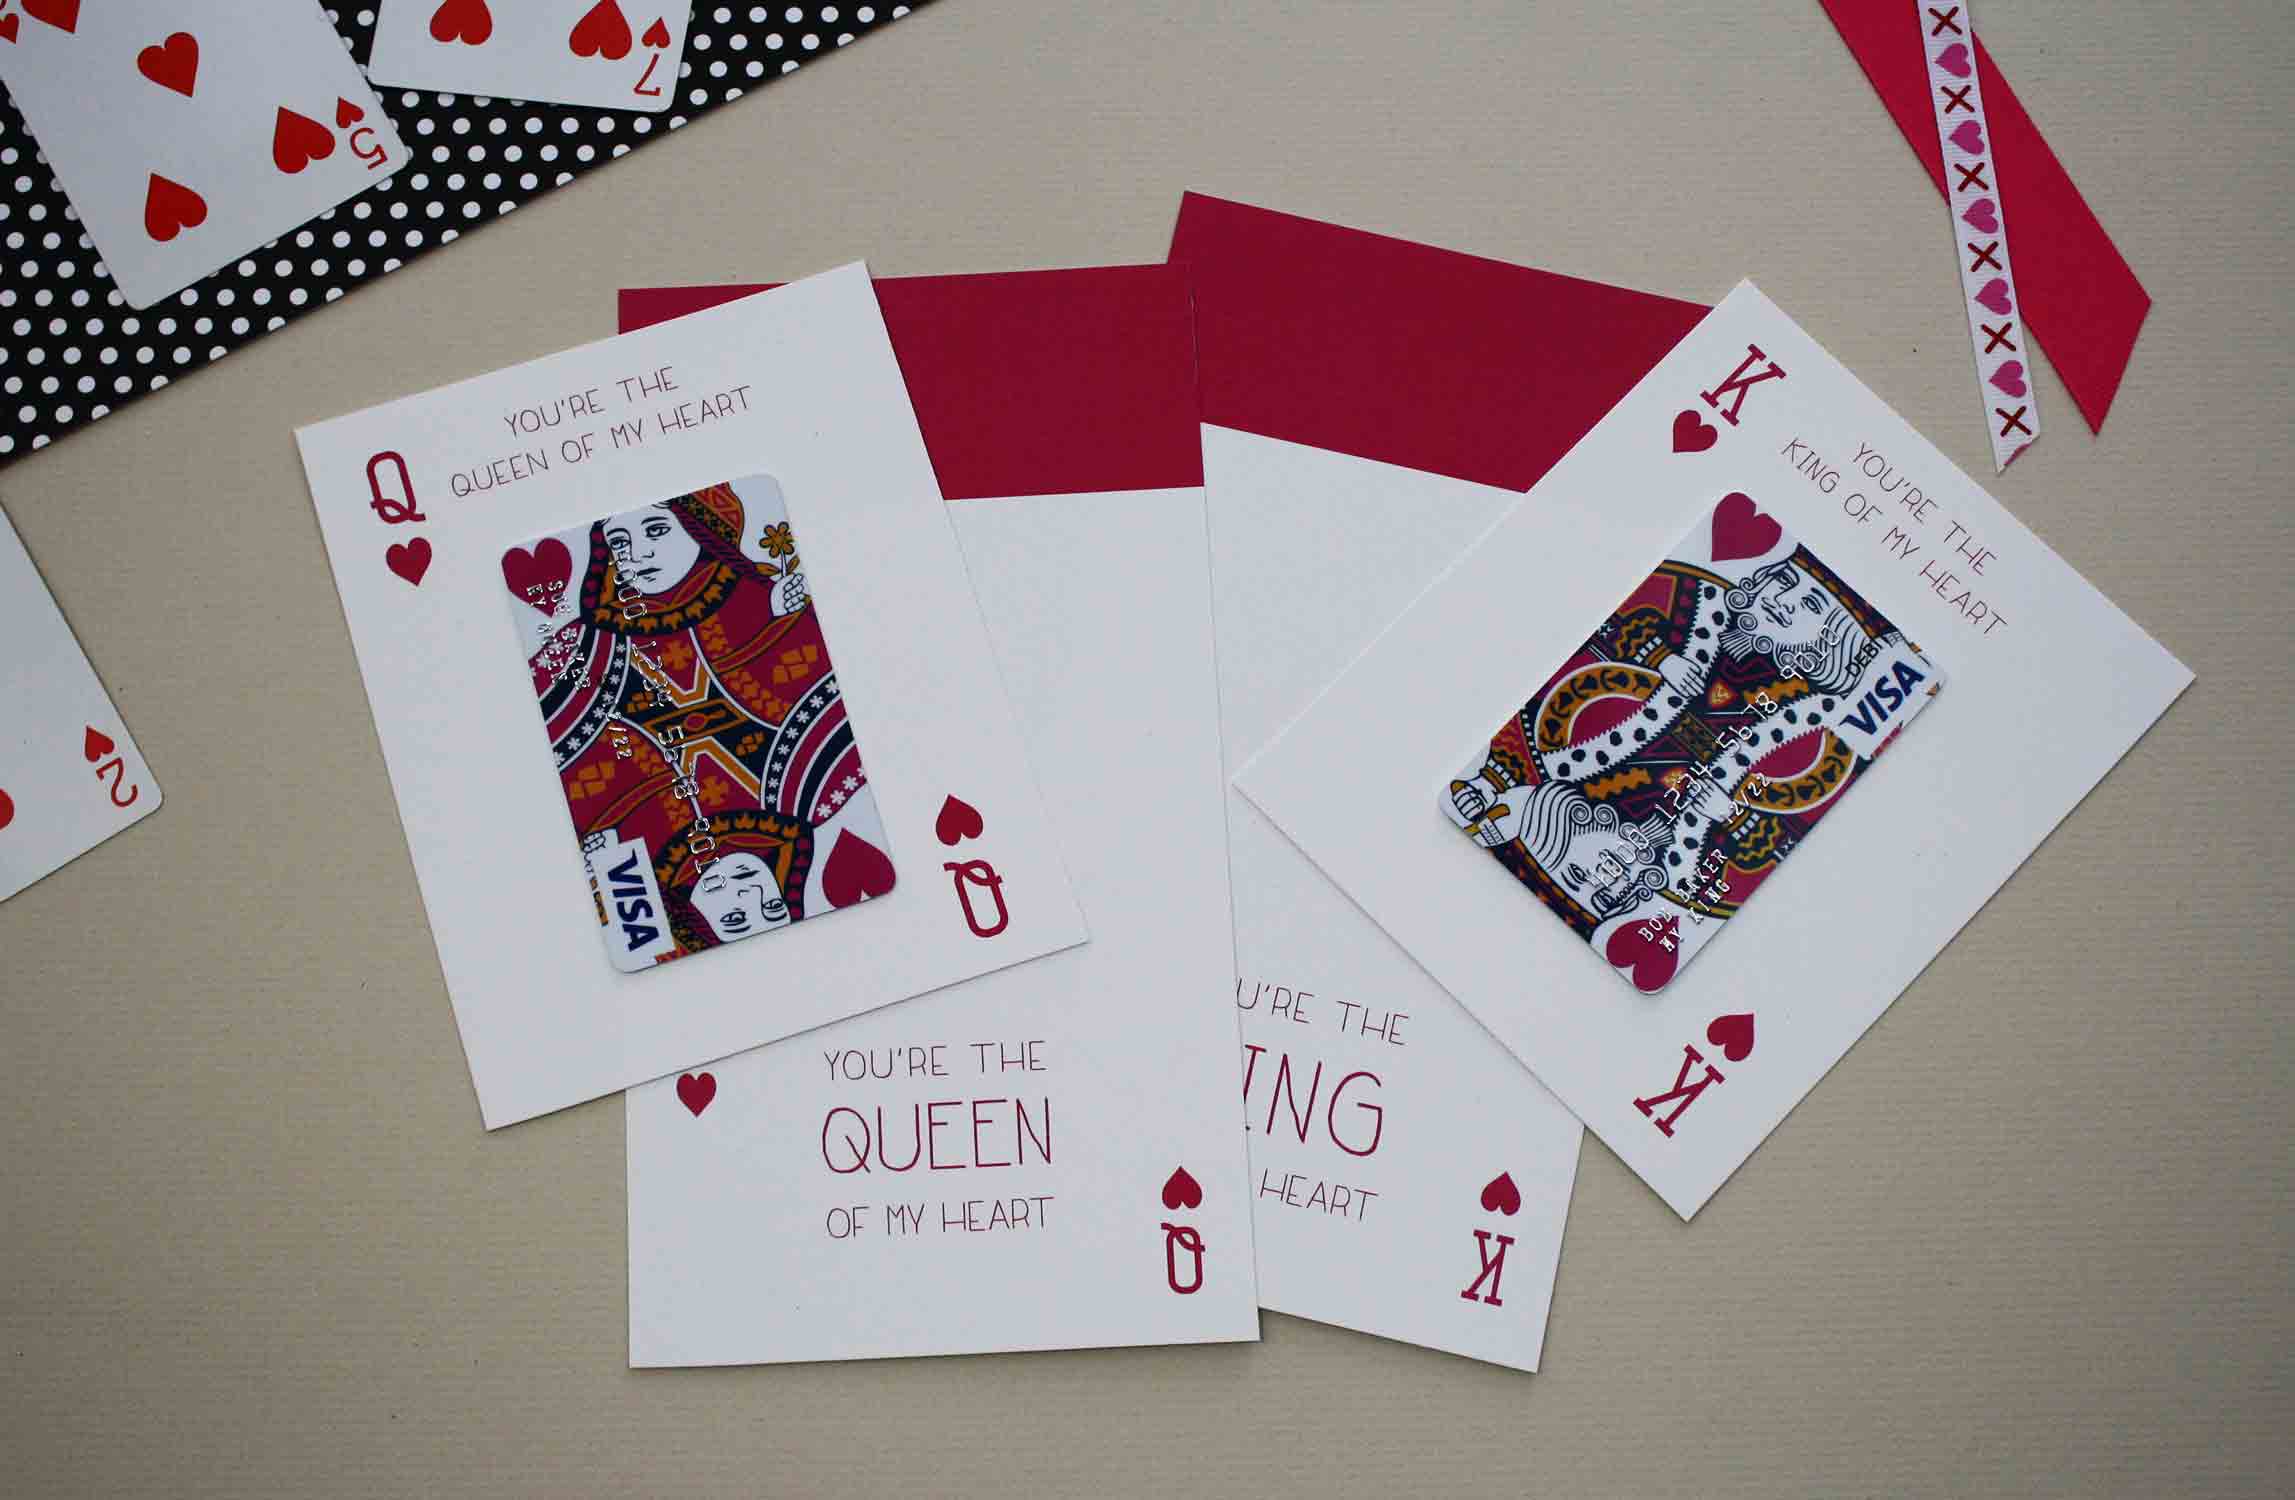 King of heart cards are ready